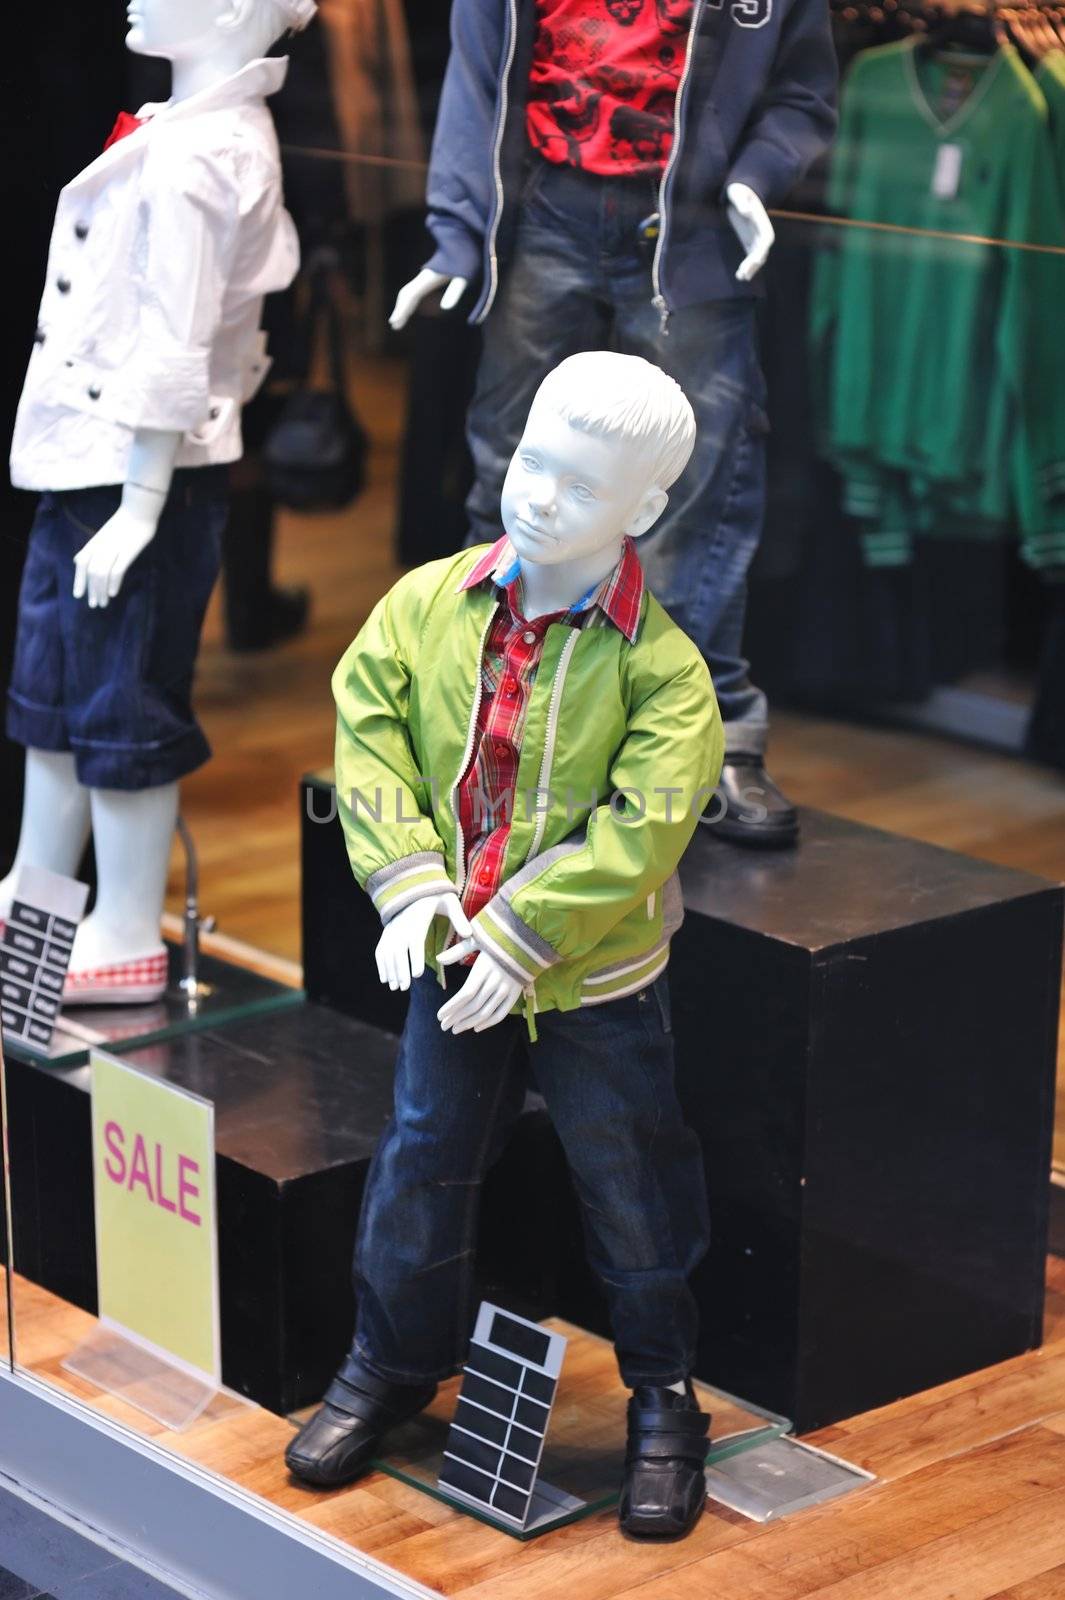 Dummy in the clothing store. No brandnames or copyright objects.